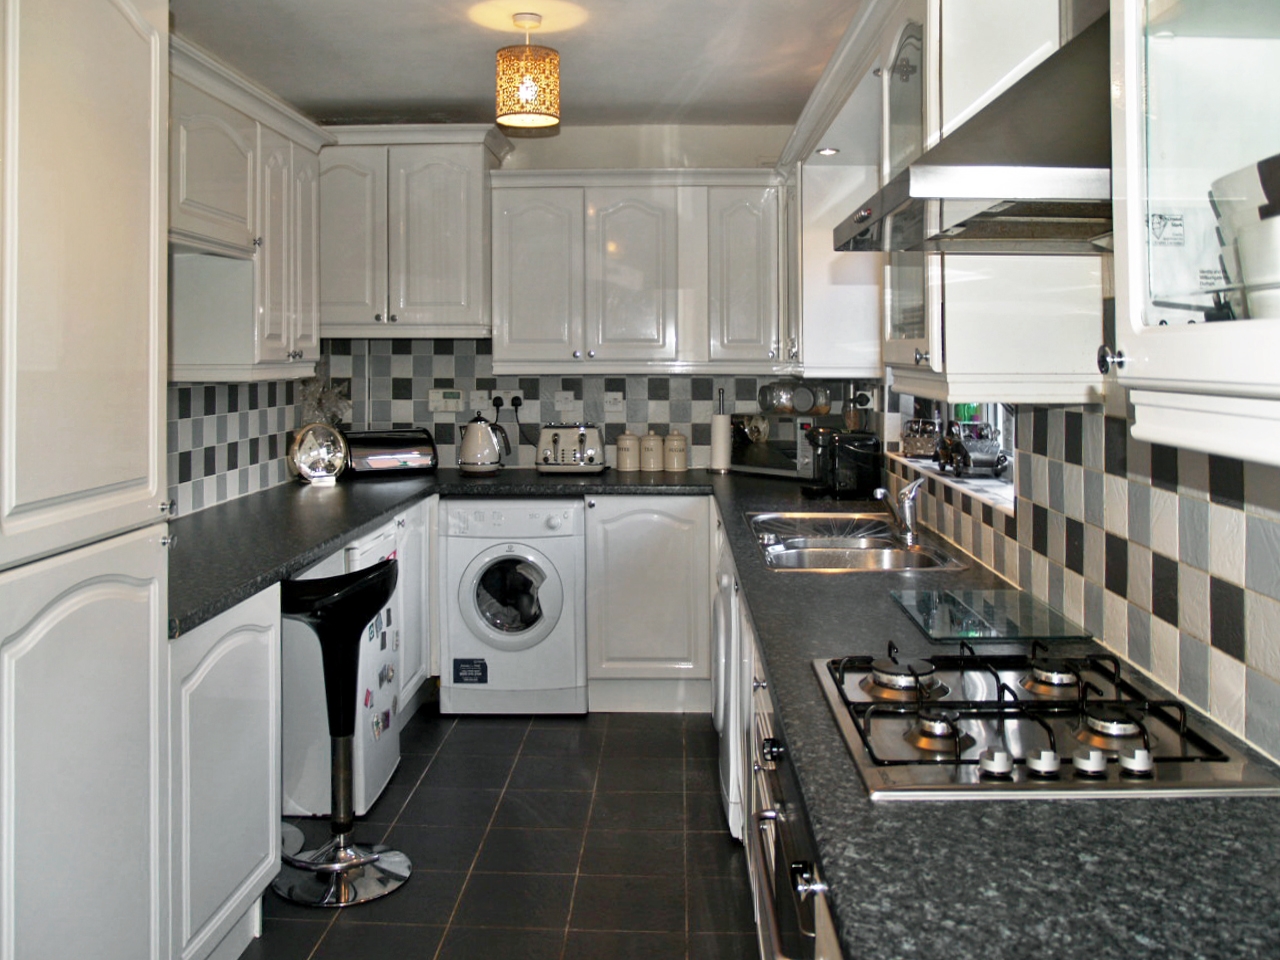 4 bedroom detached house SSTC in Solihull - photograph 8.